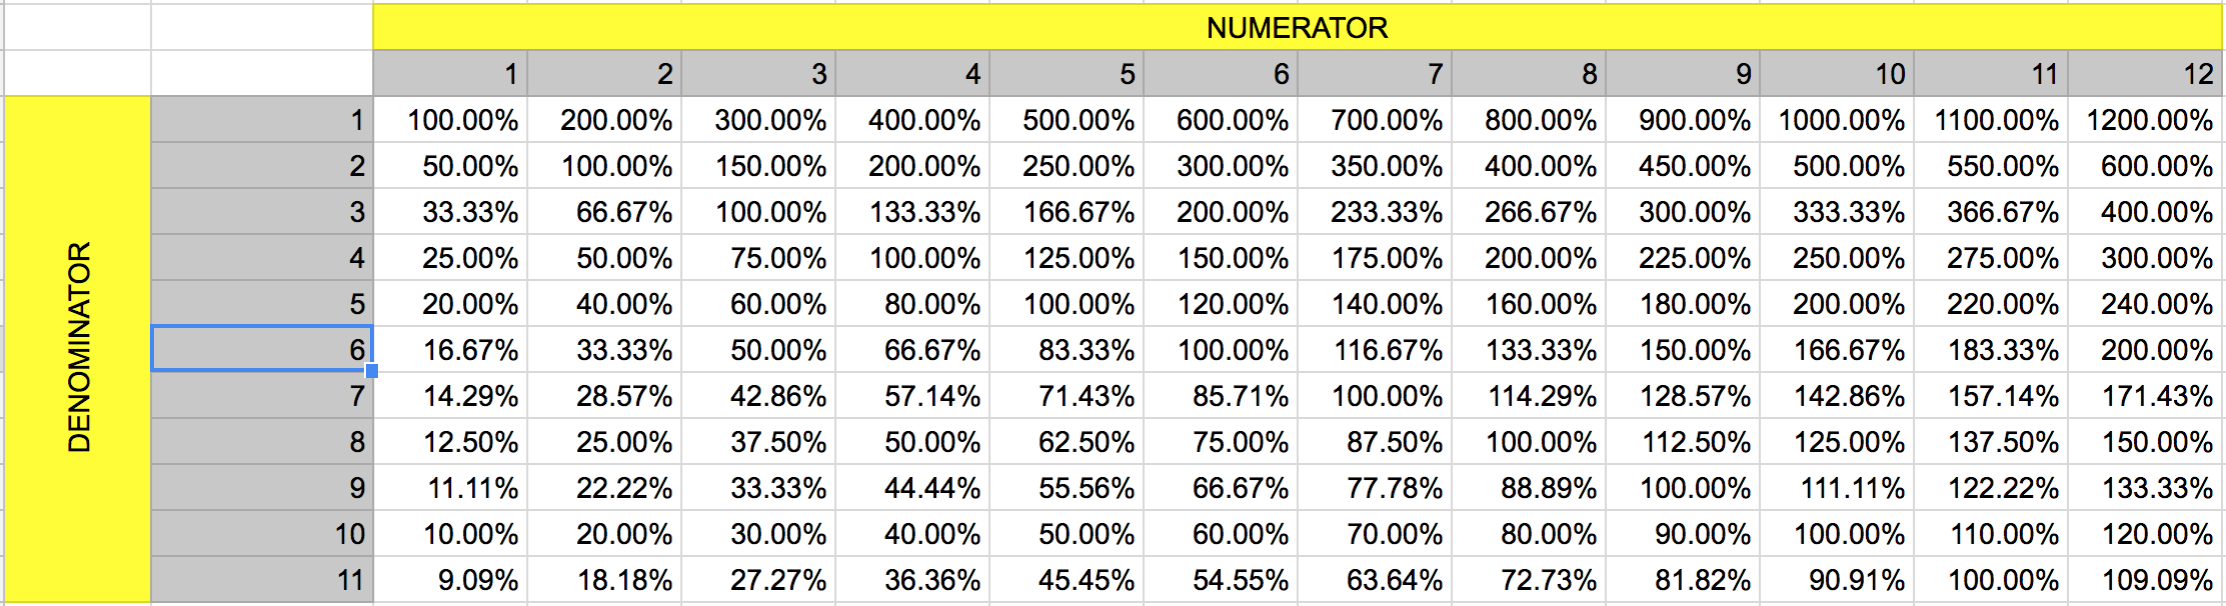 Fraction To Percentage Chart